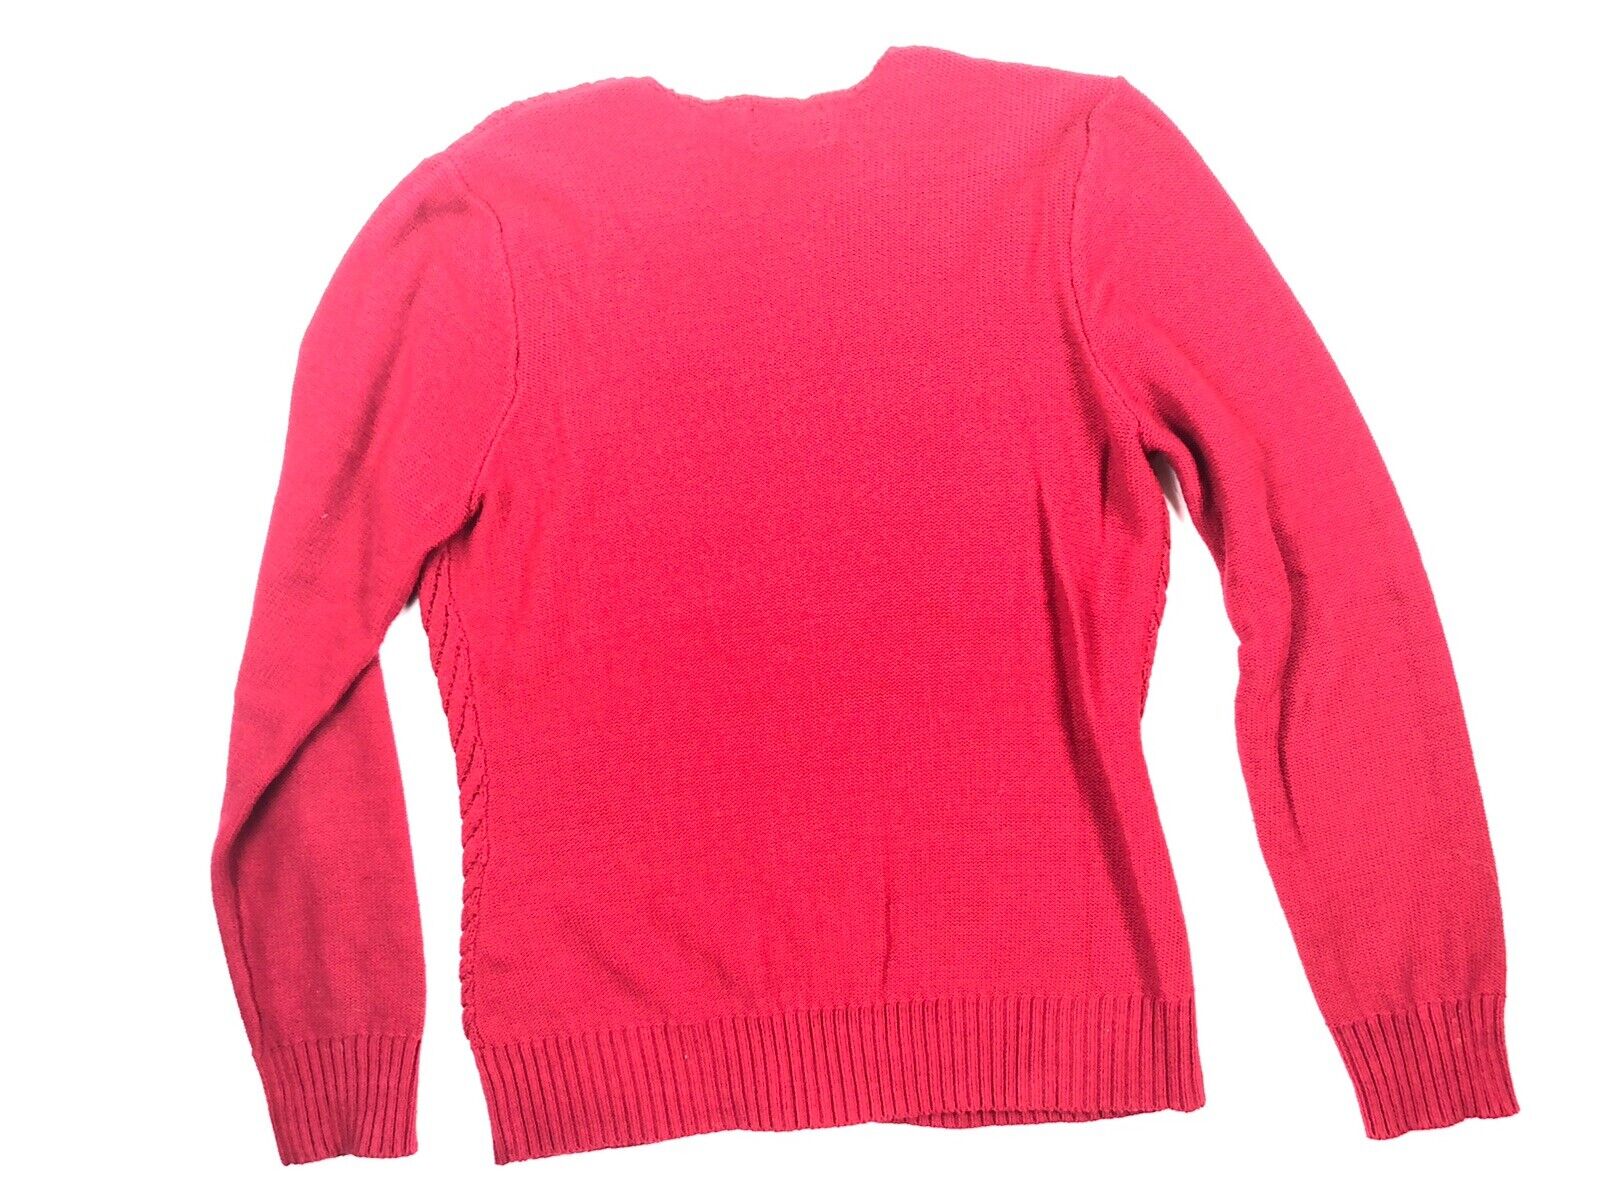 Chaps Classic Large Red Sweater Cable Knit V Neck Solid